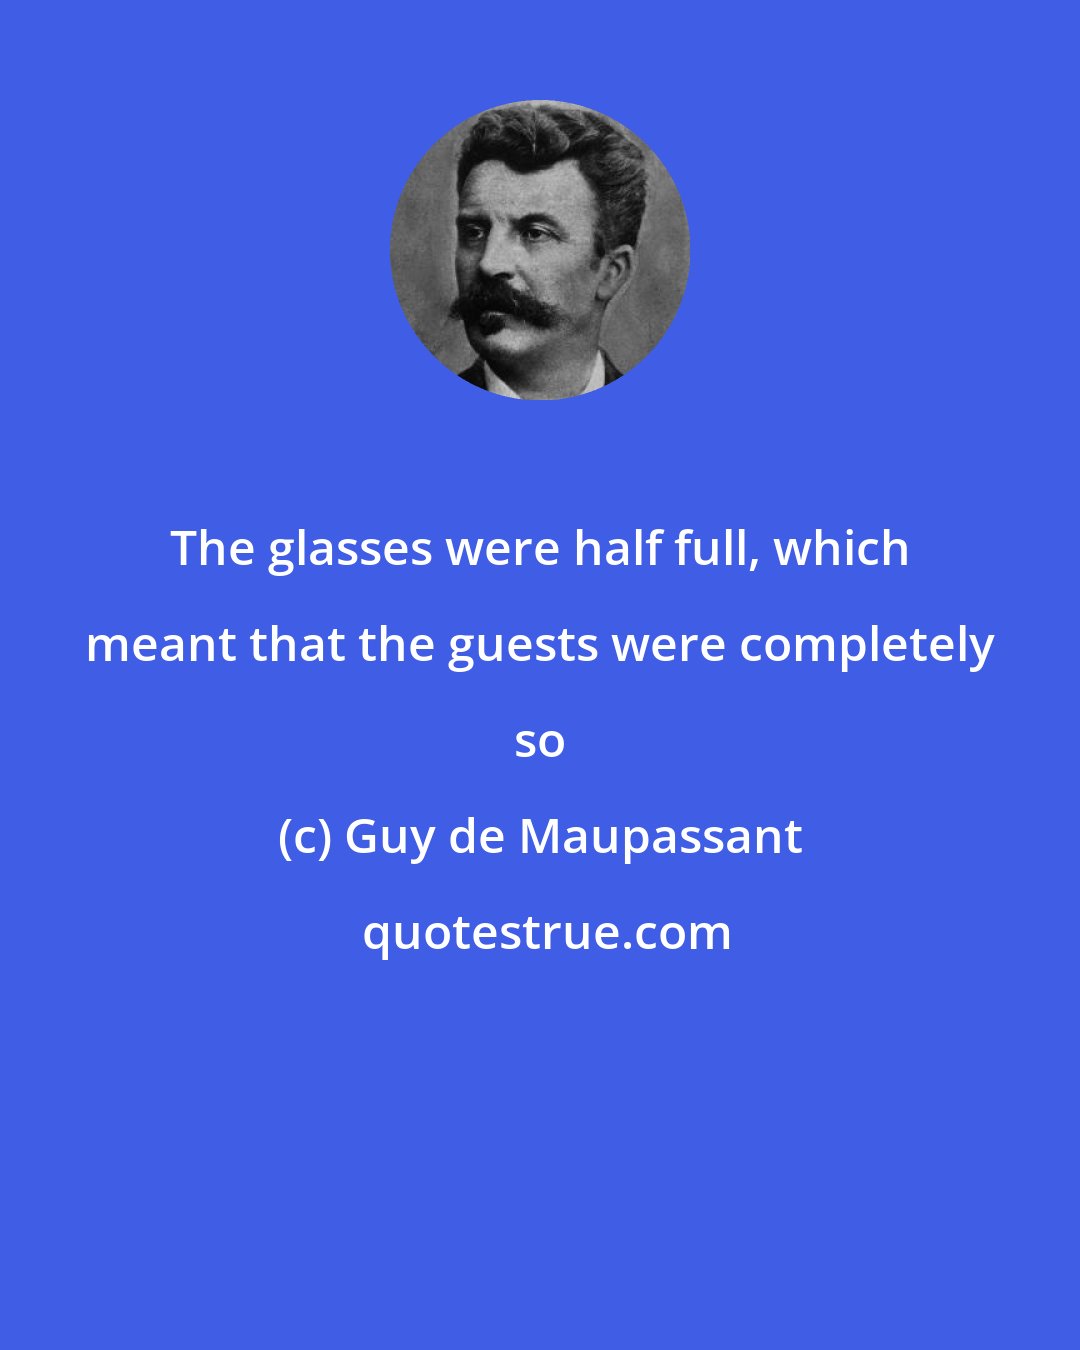 Guy de Maupassant: The glasses were half full, which meant that the guests were completely so